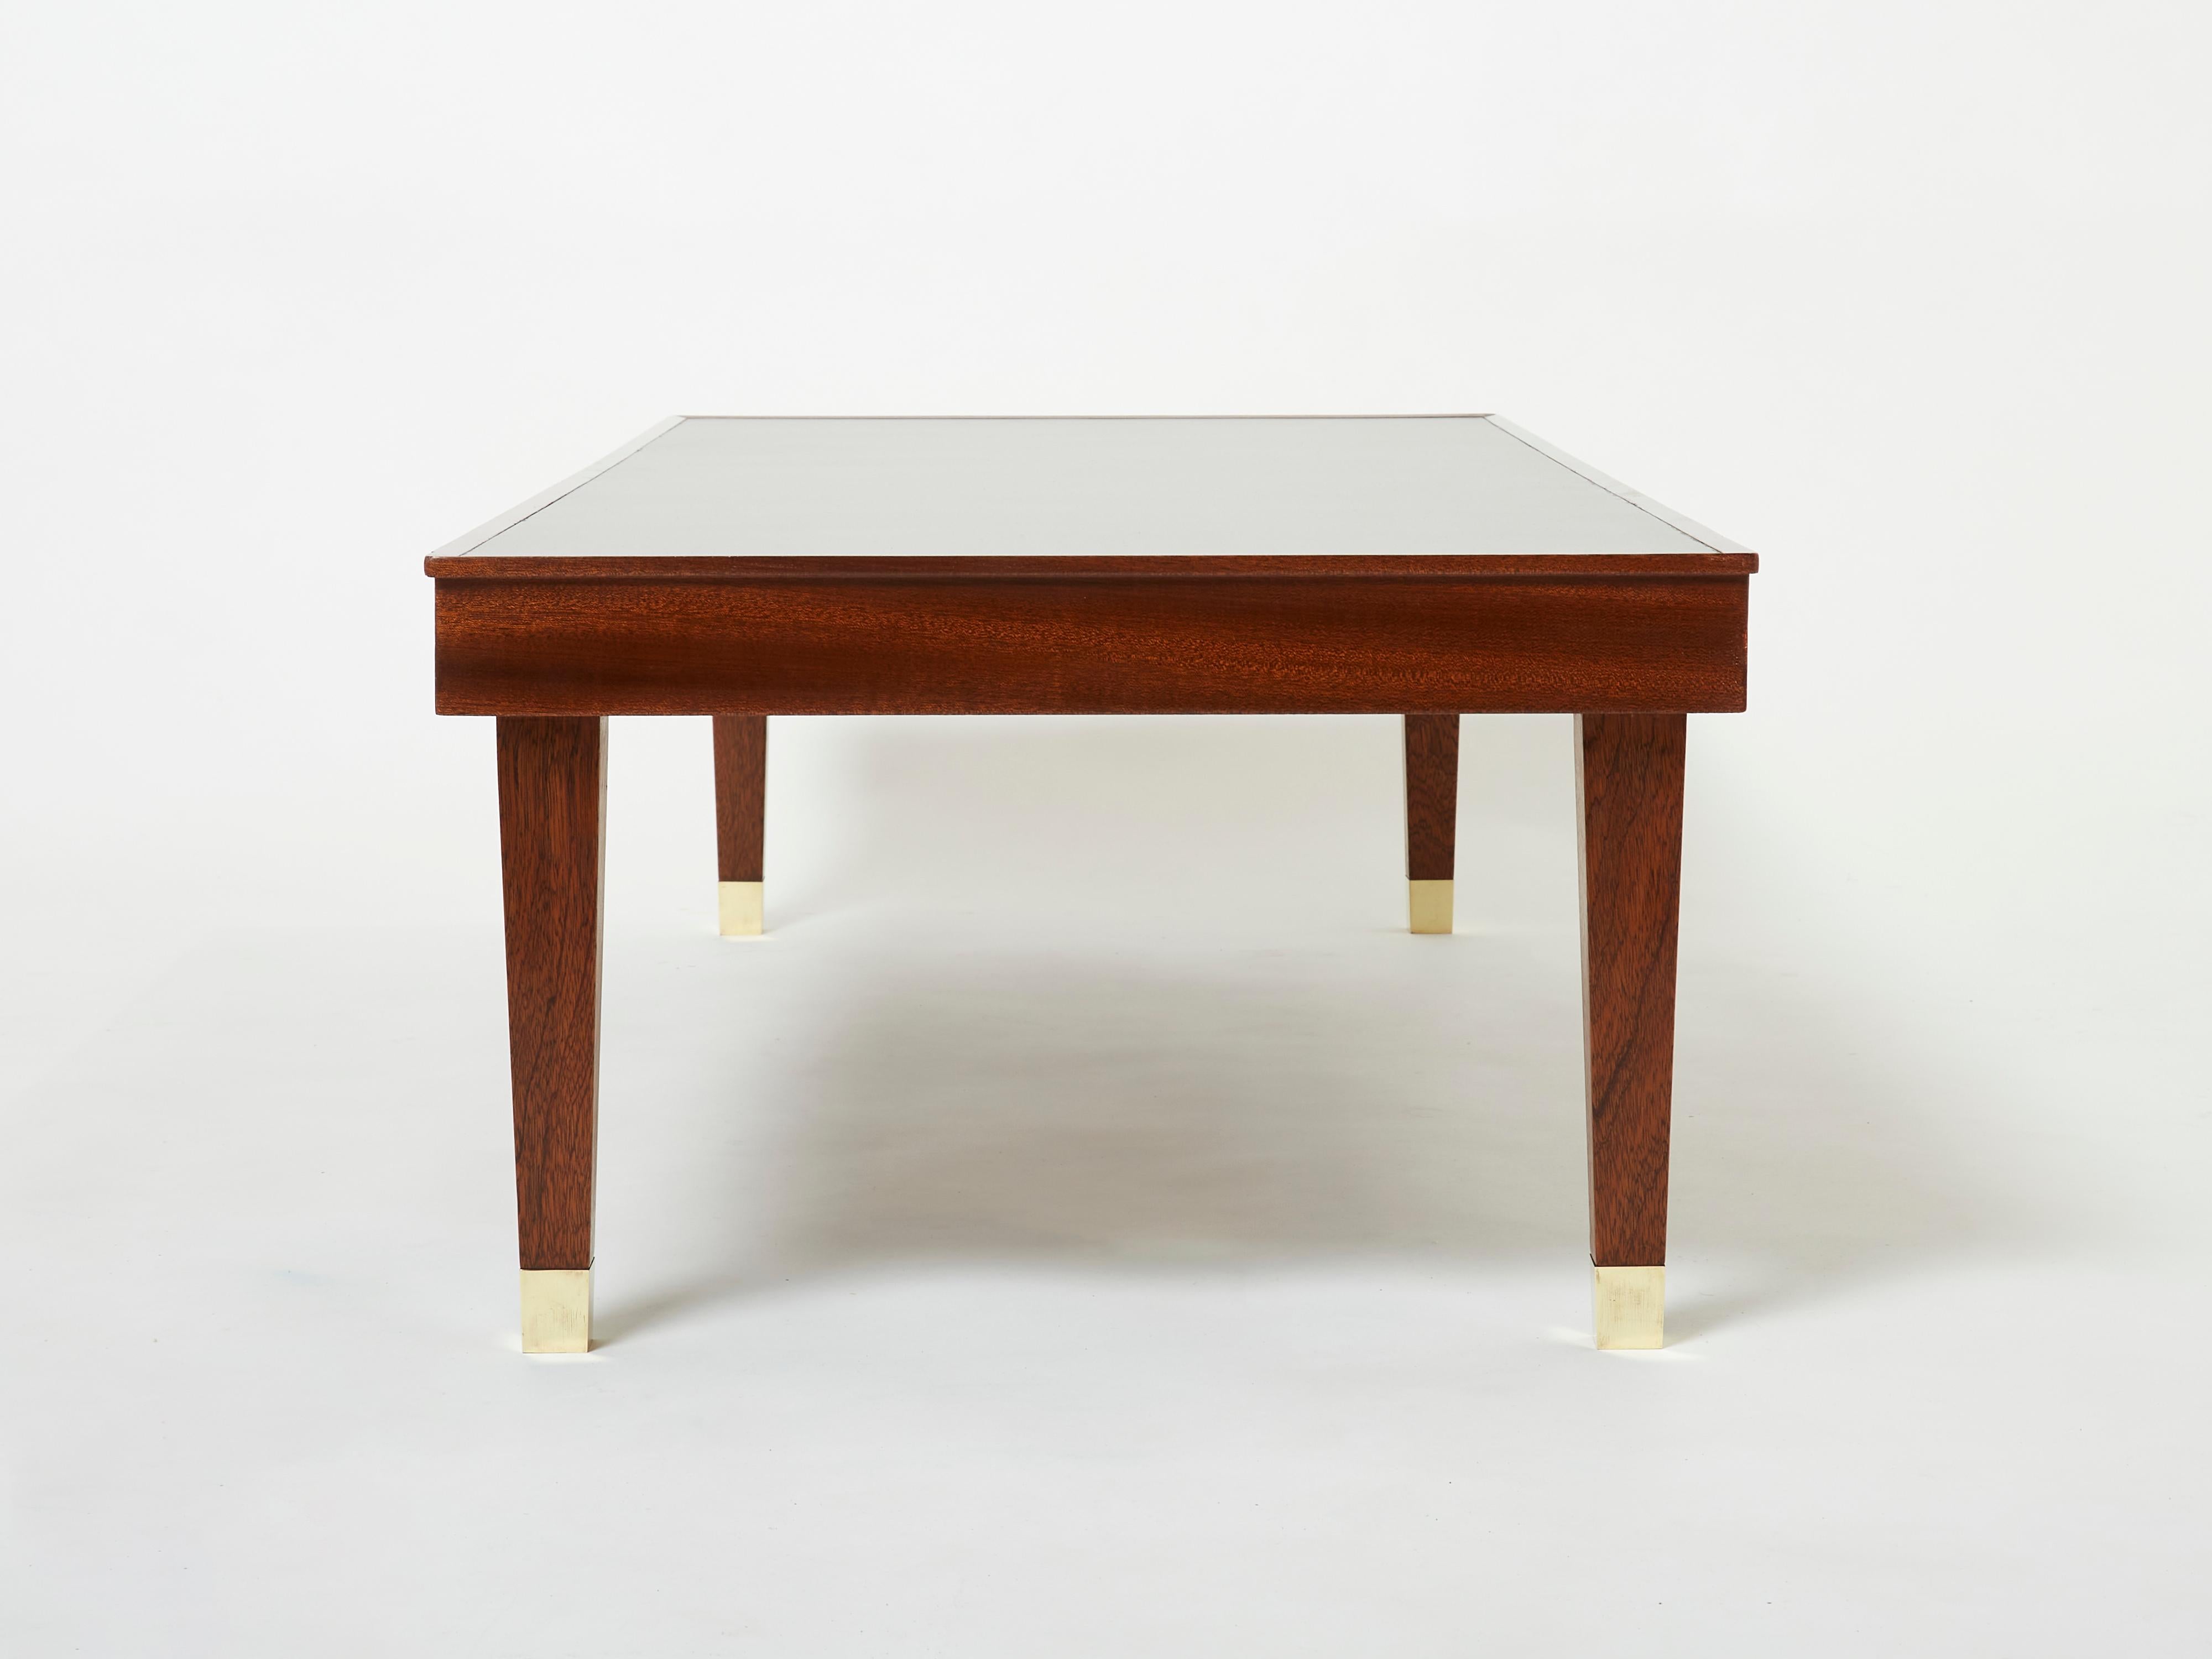 Jacques Adnet Mahogany Brass Modernist Coffee Table, 1950s For Sale 6